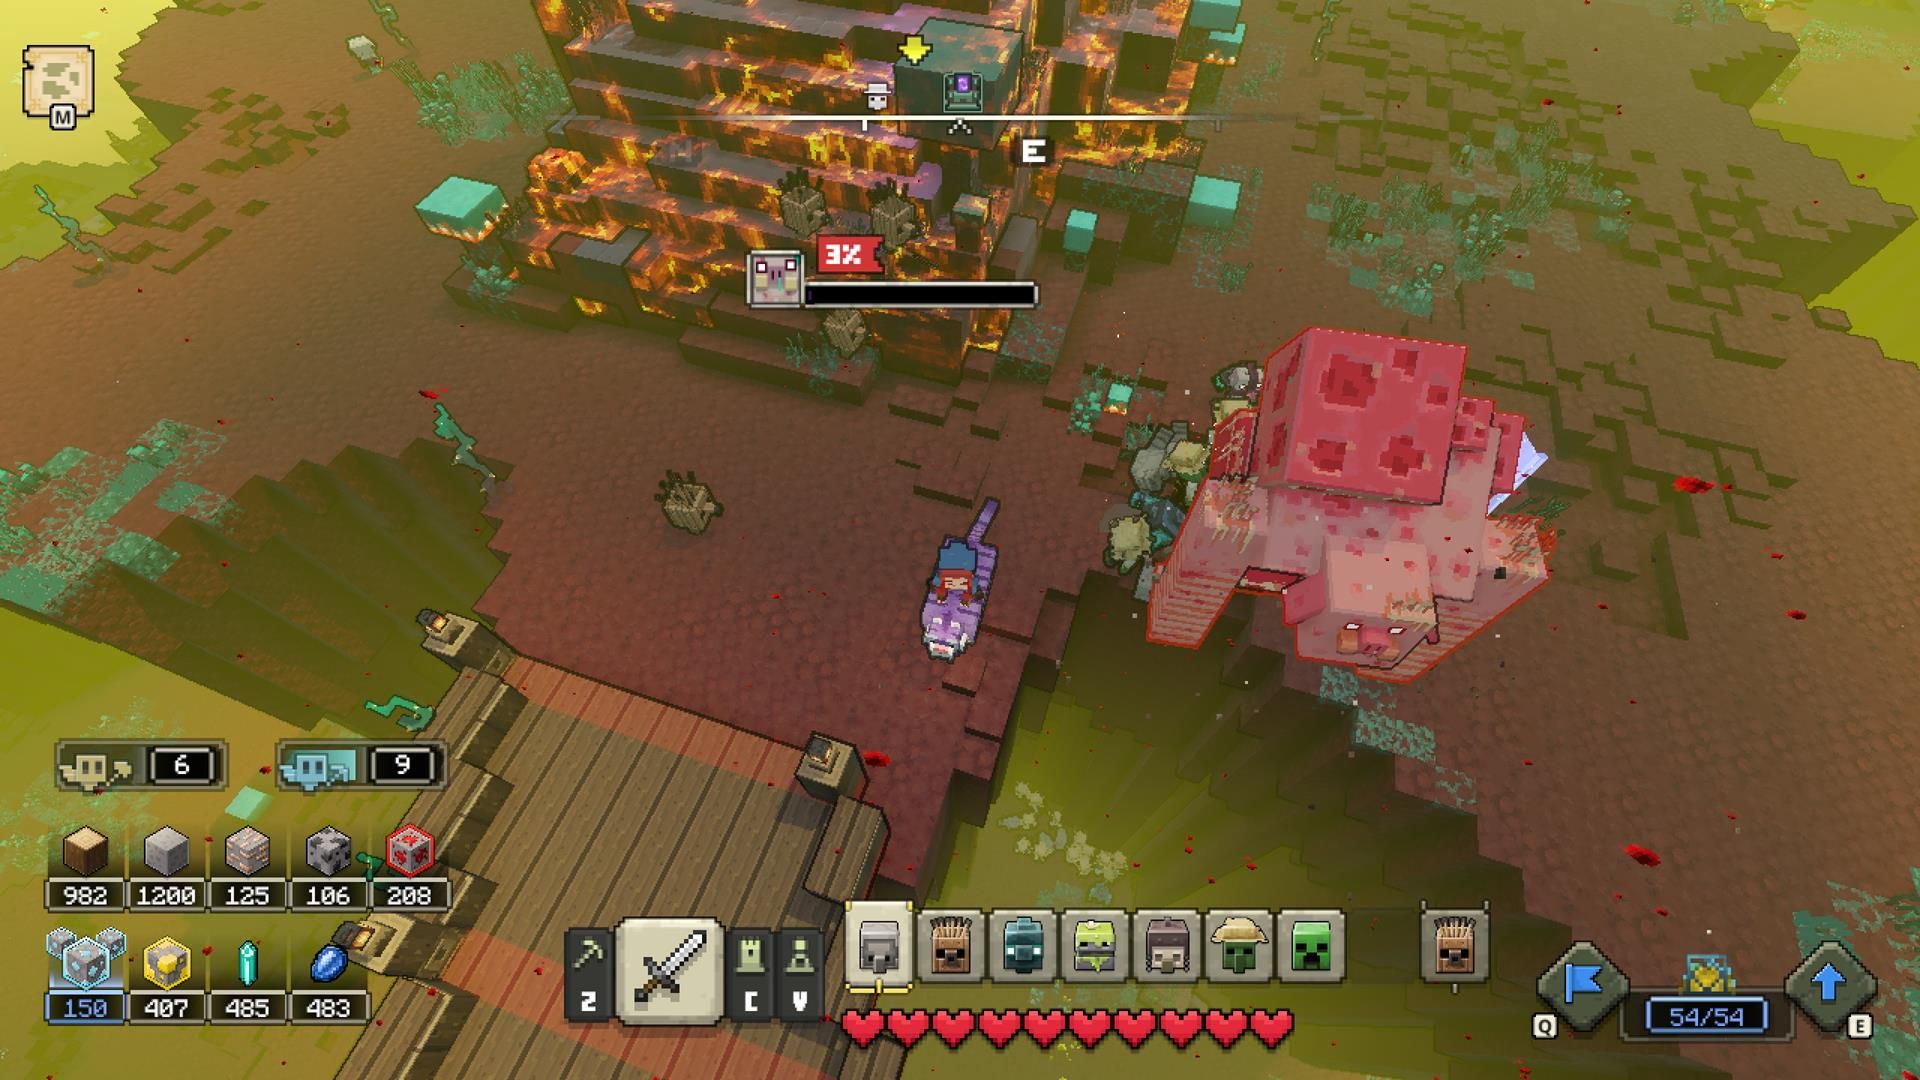 Minecraft Legends devs say game could take 18-20 hours to beat